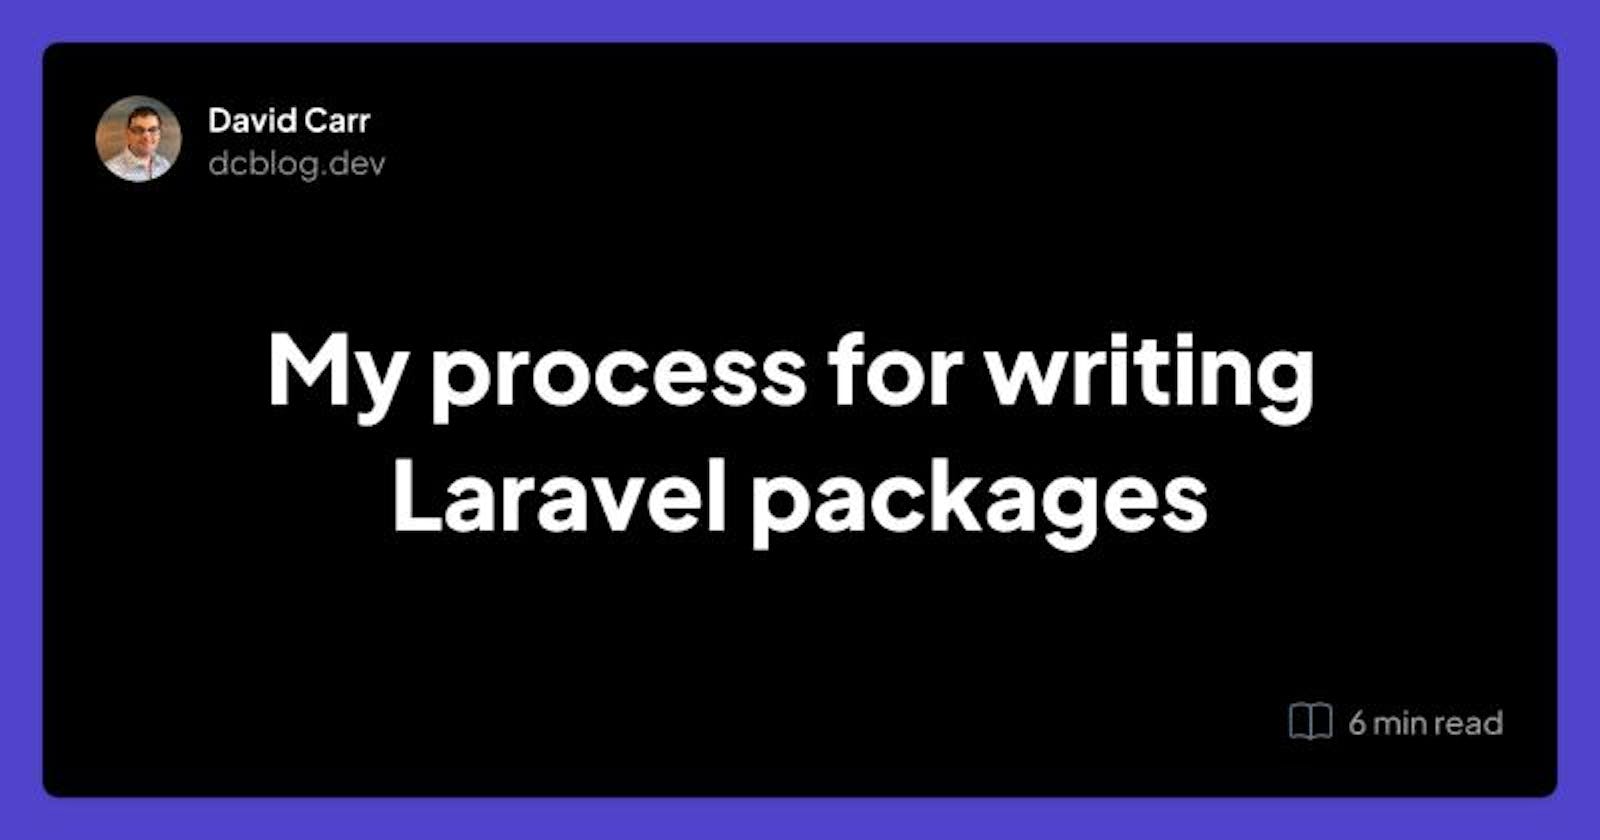 My process for writing Laravel packages